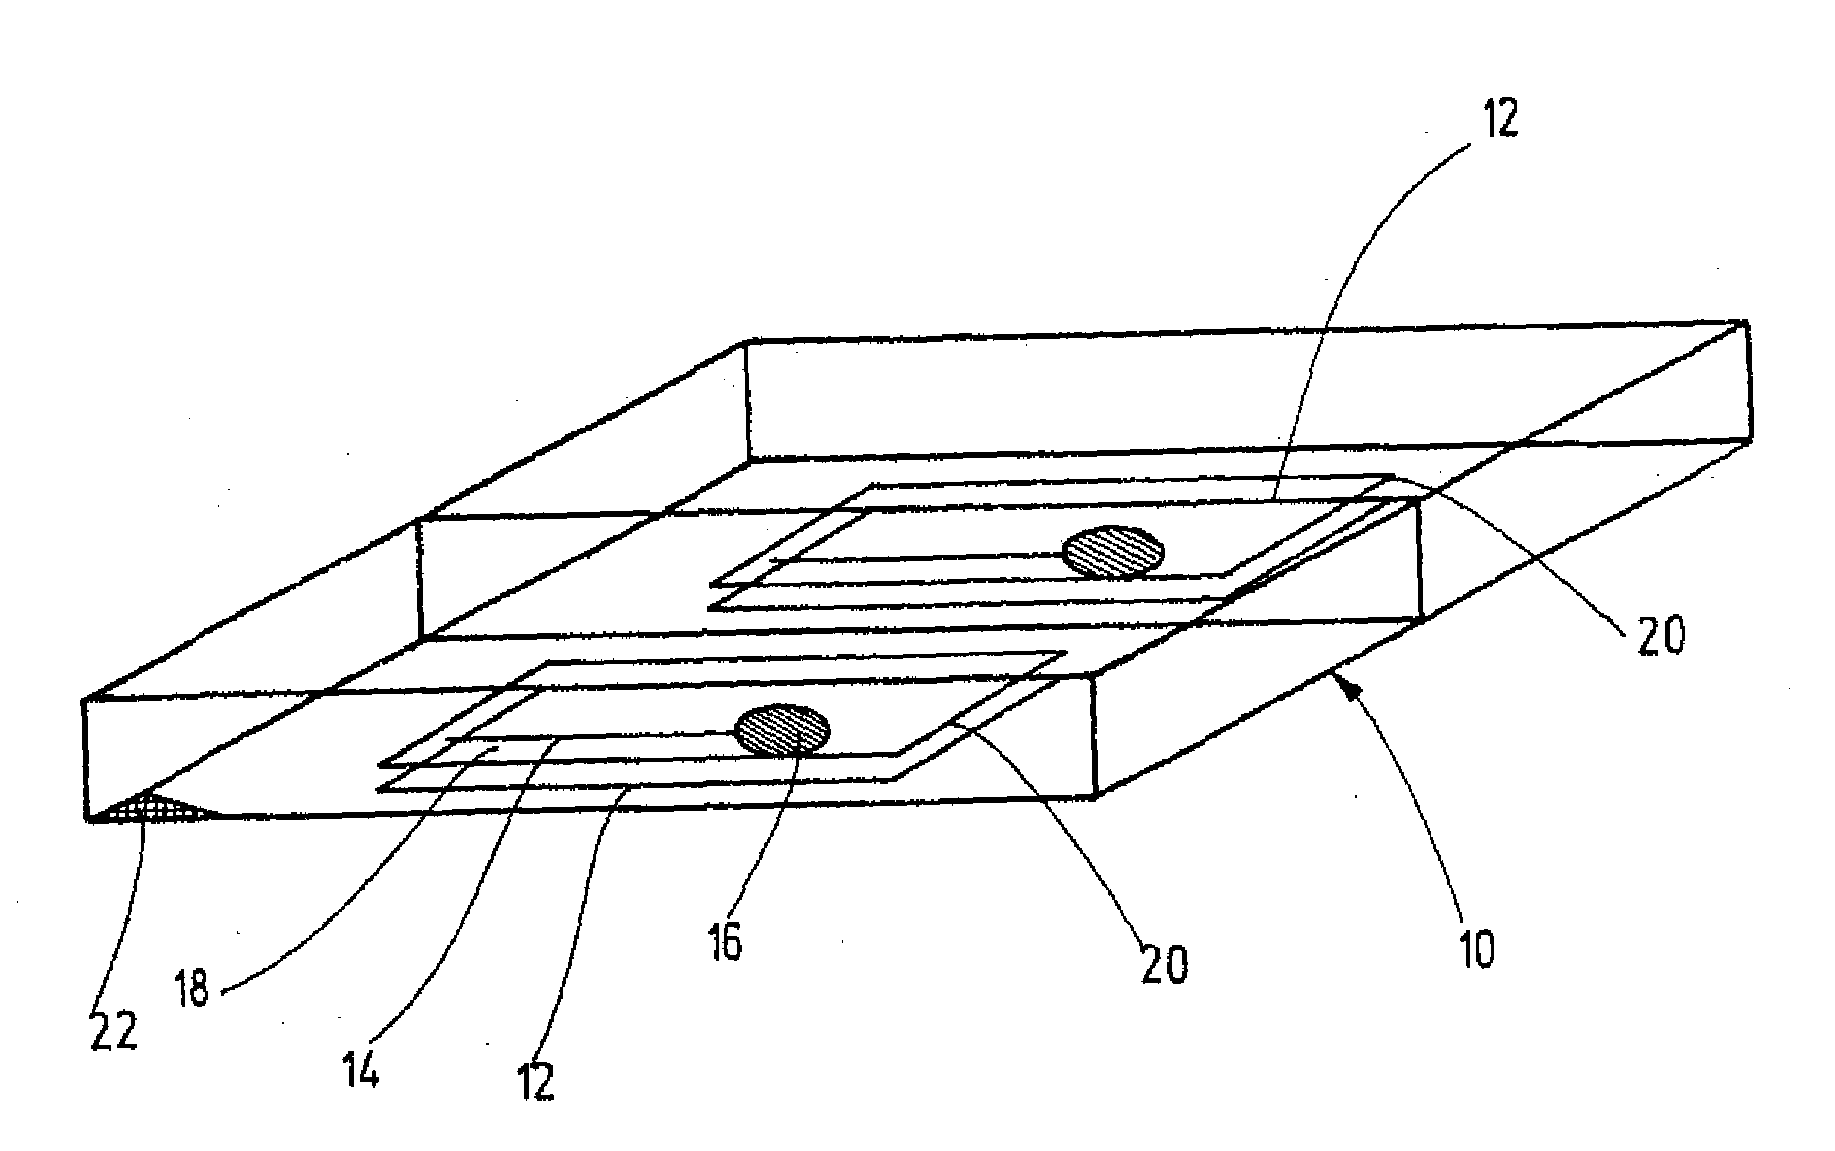 Package for an object having a hydrophilic surface coating